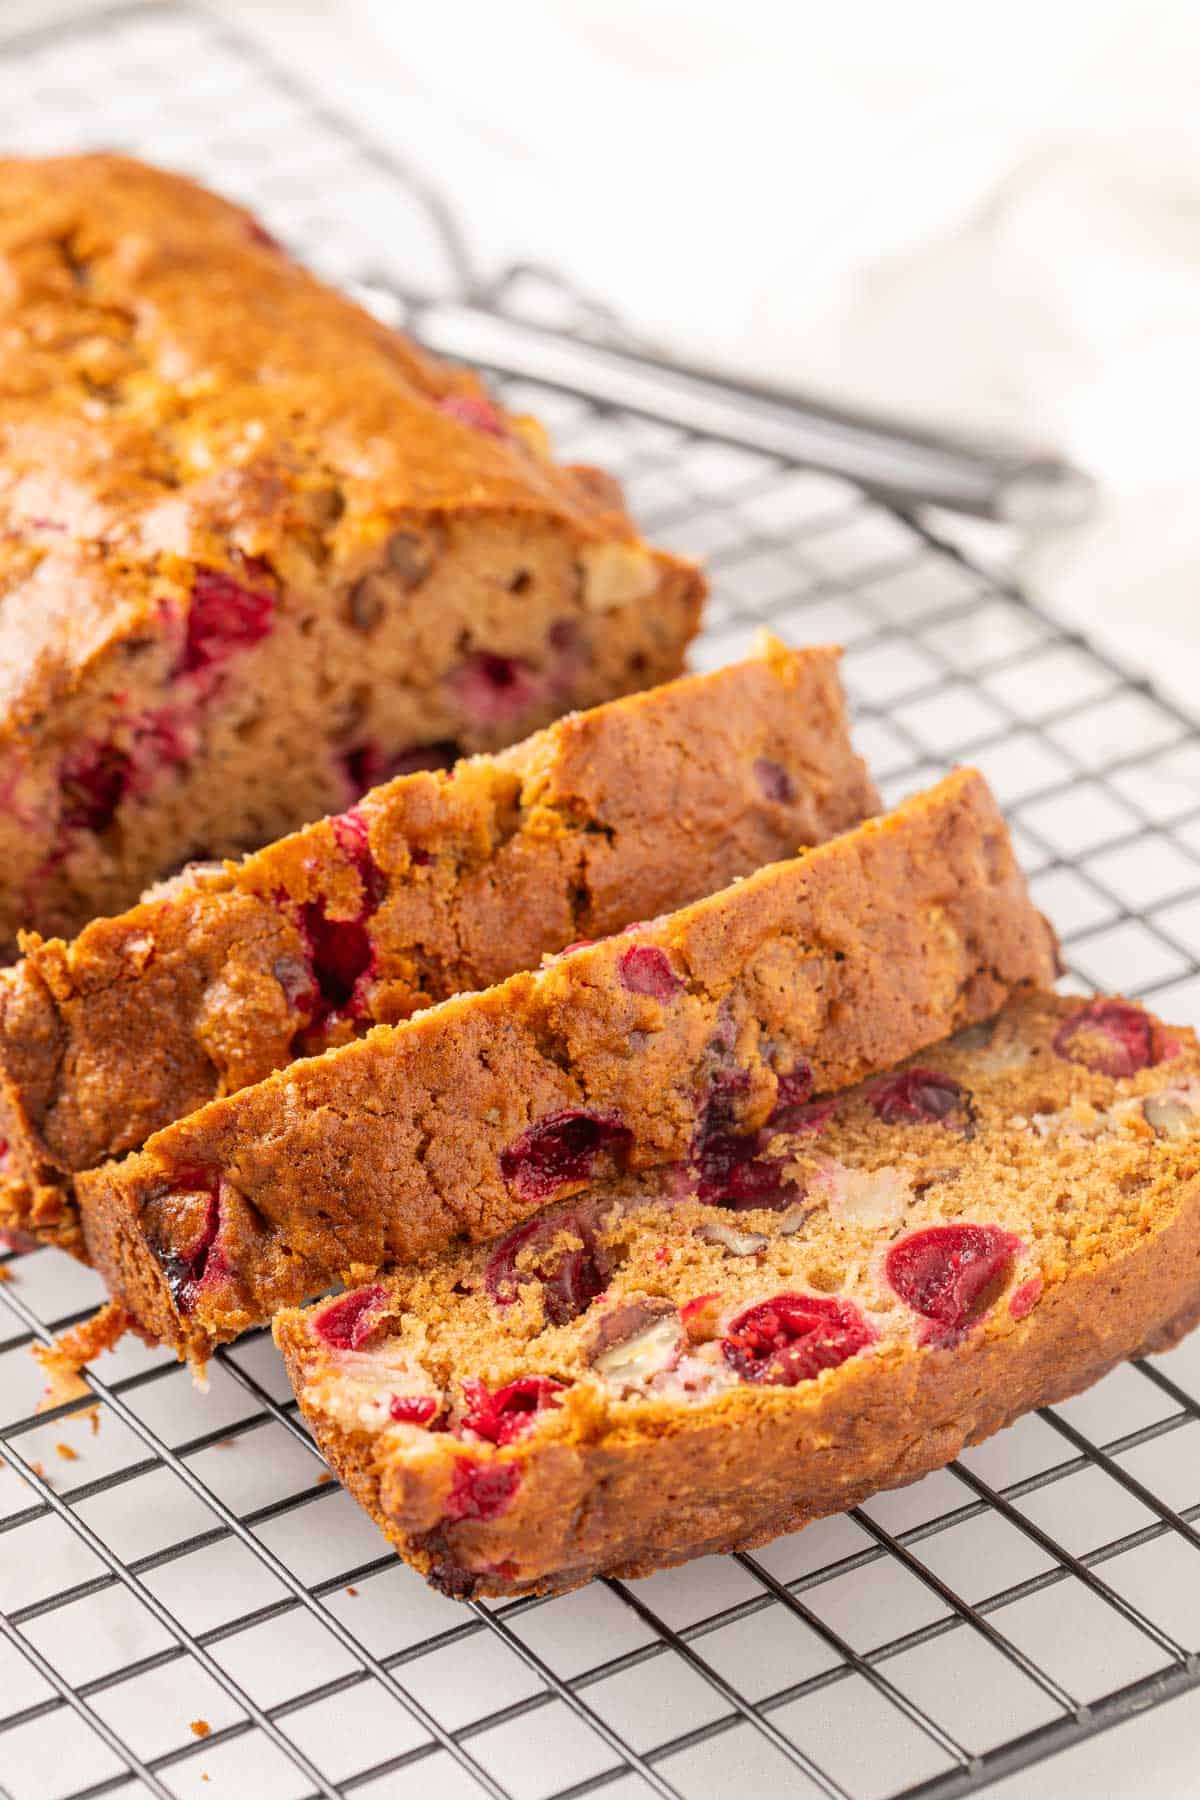 Front view of a partially sliced loaf of cranberry apple bread on a black wire rack.